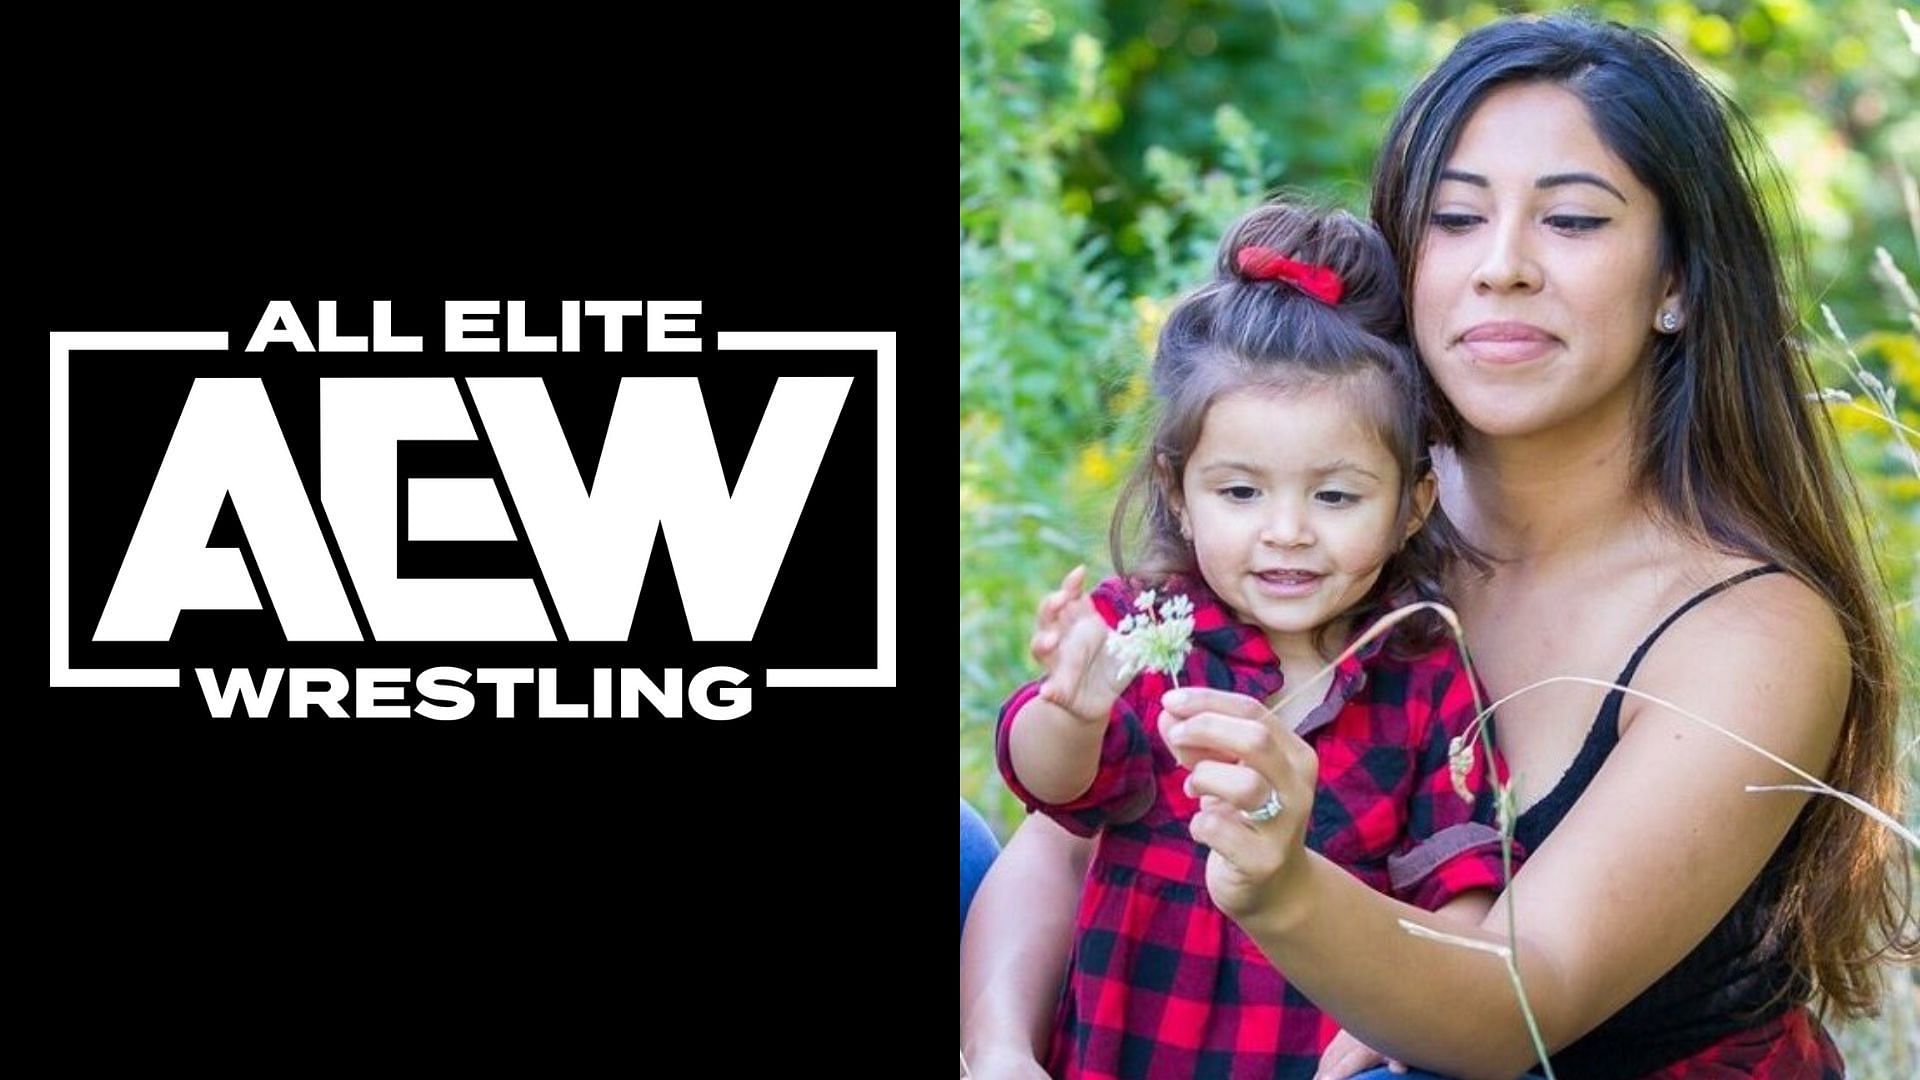 Could the support of his wife and daughter push this AEW star to capture gold soon?